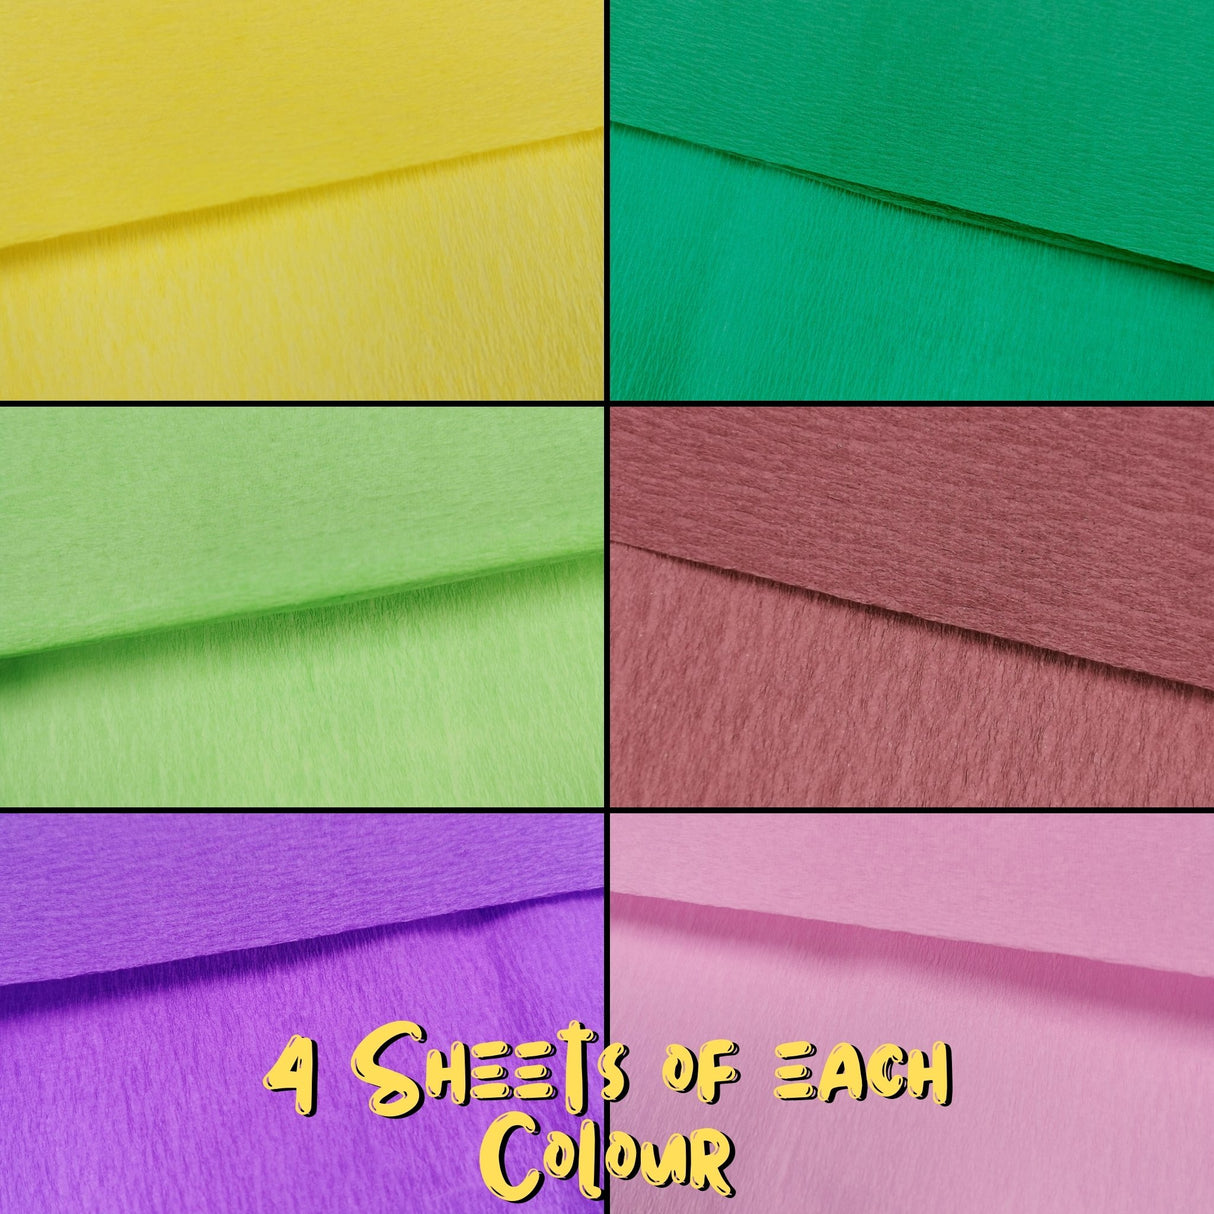 48 Extra Large Assorted Colour Crepe Paper Sheets For Flower Crafting & Gift Wrapping 50cm x 300cm